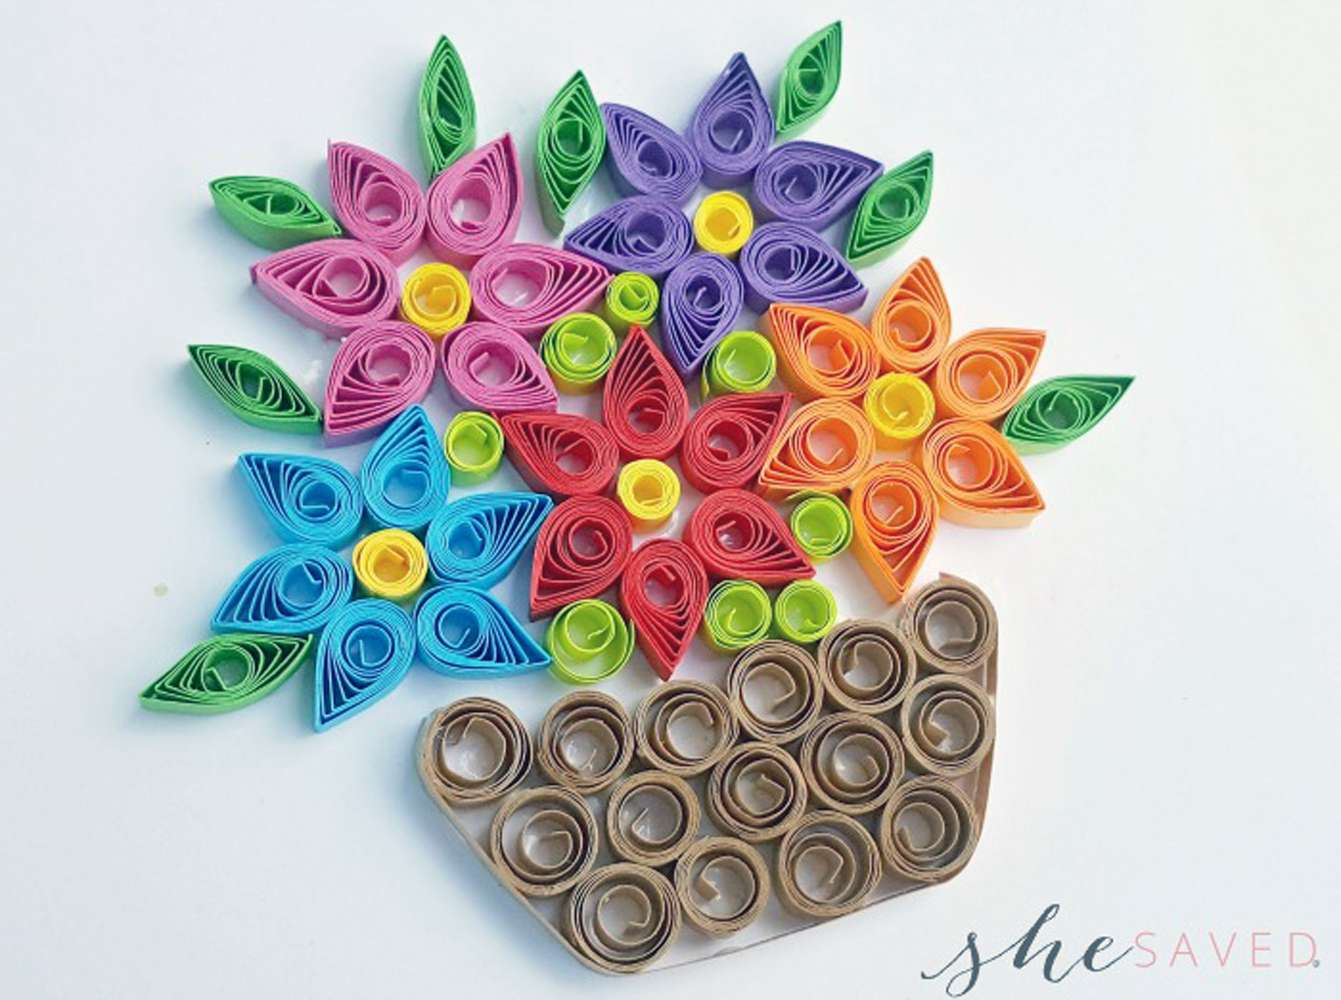 11 Paper Quilling Patterns For Beginners - Free Quilling Designs